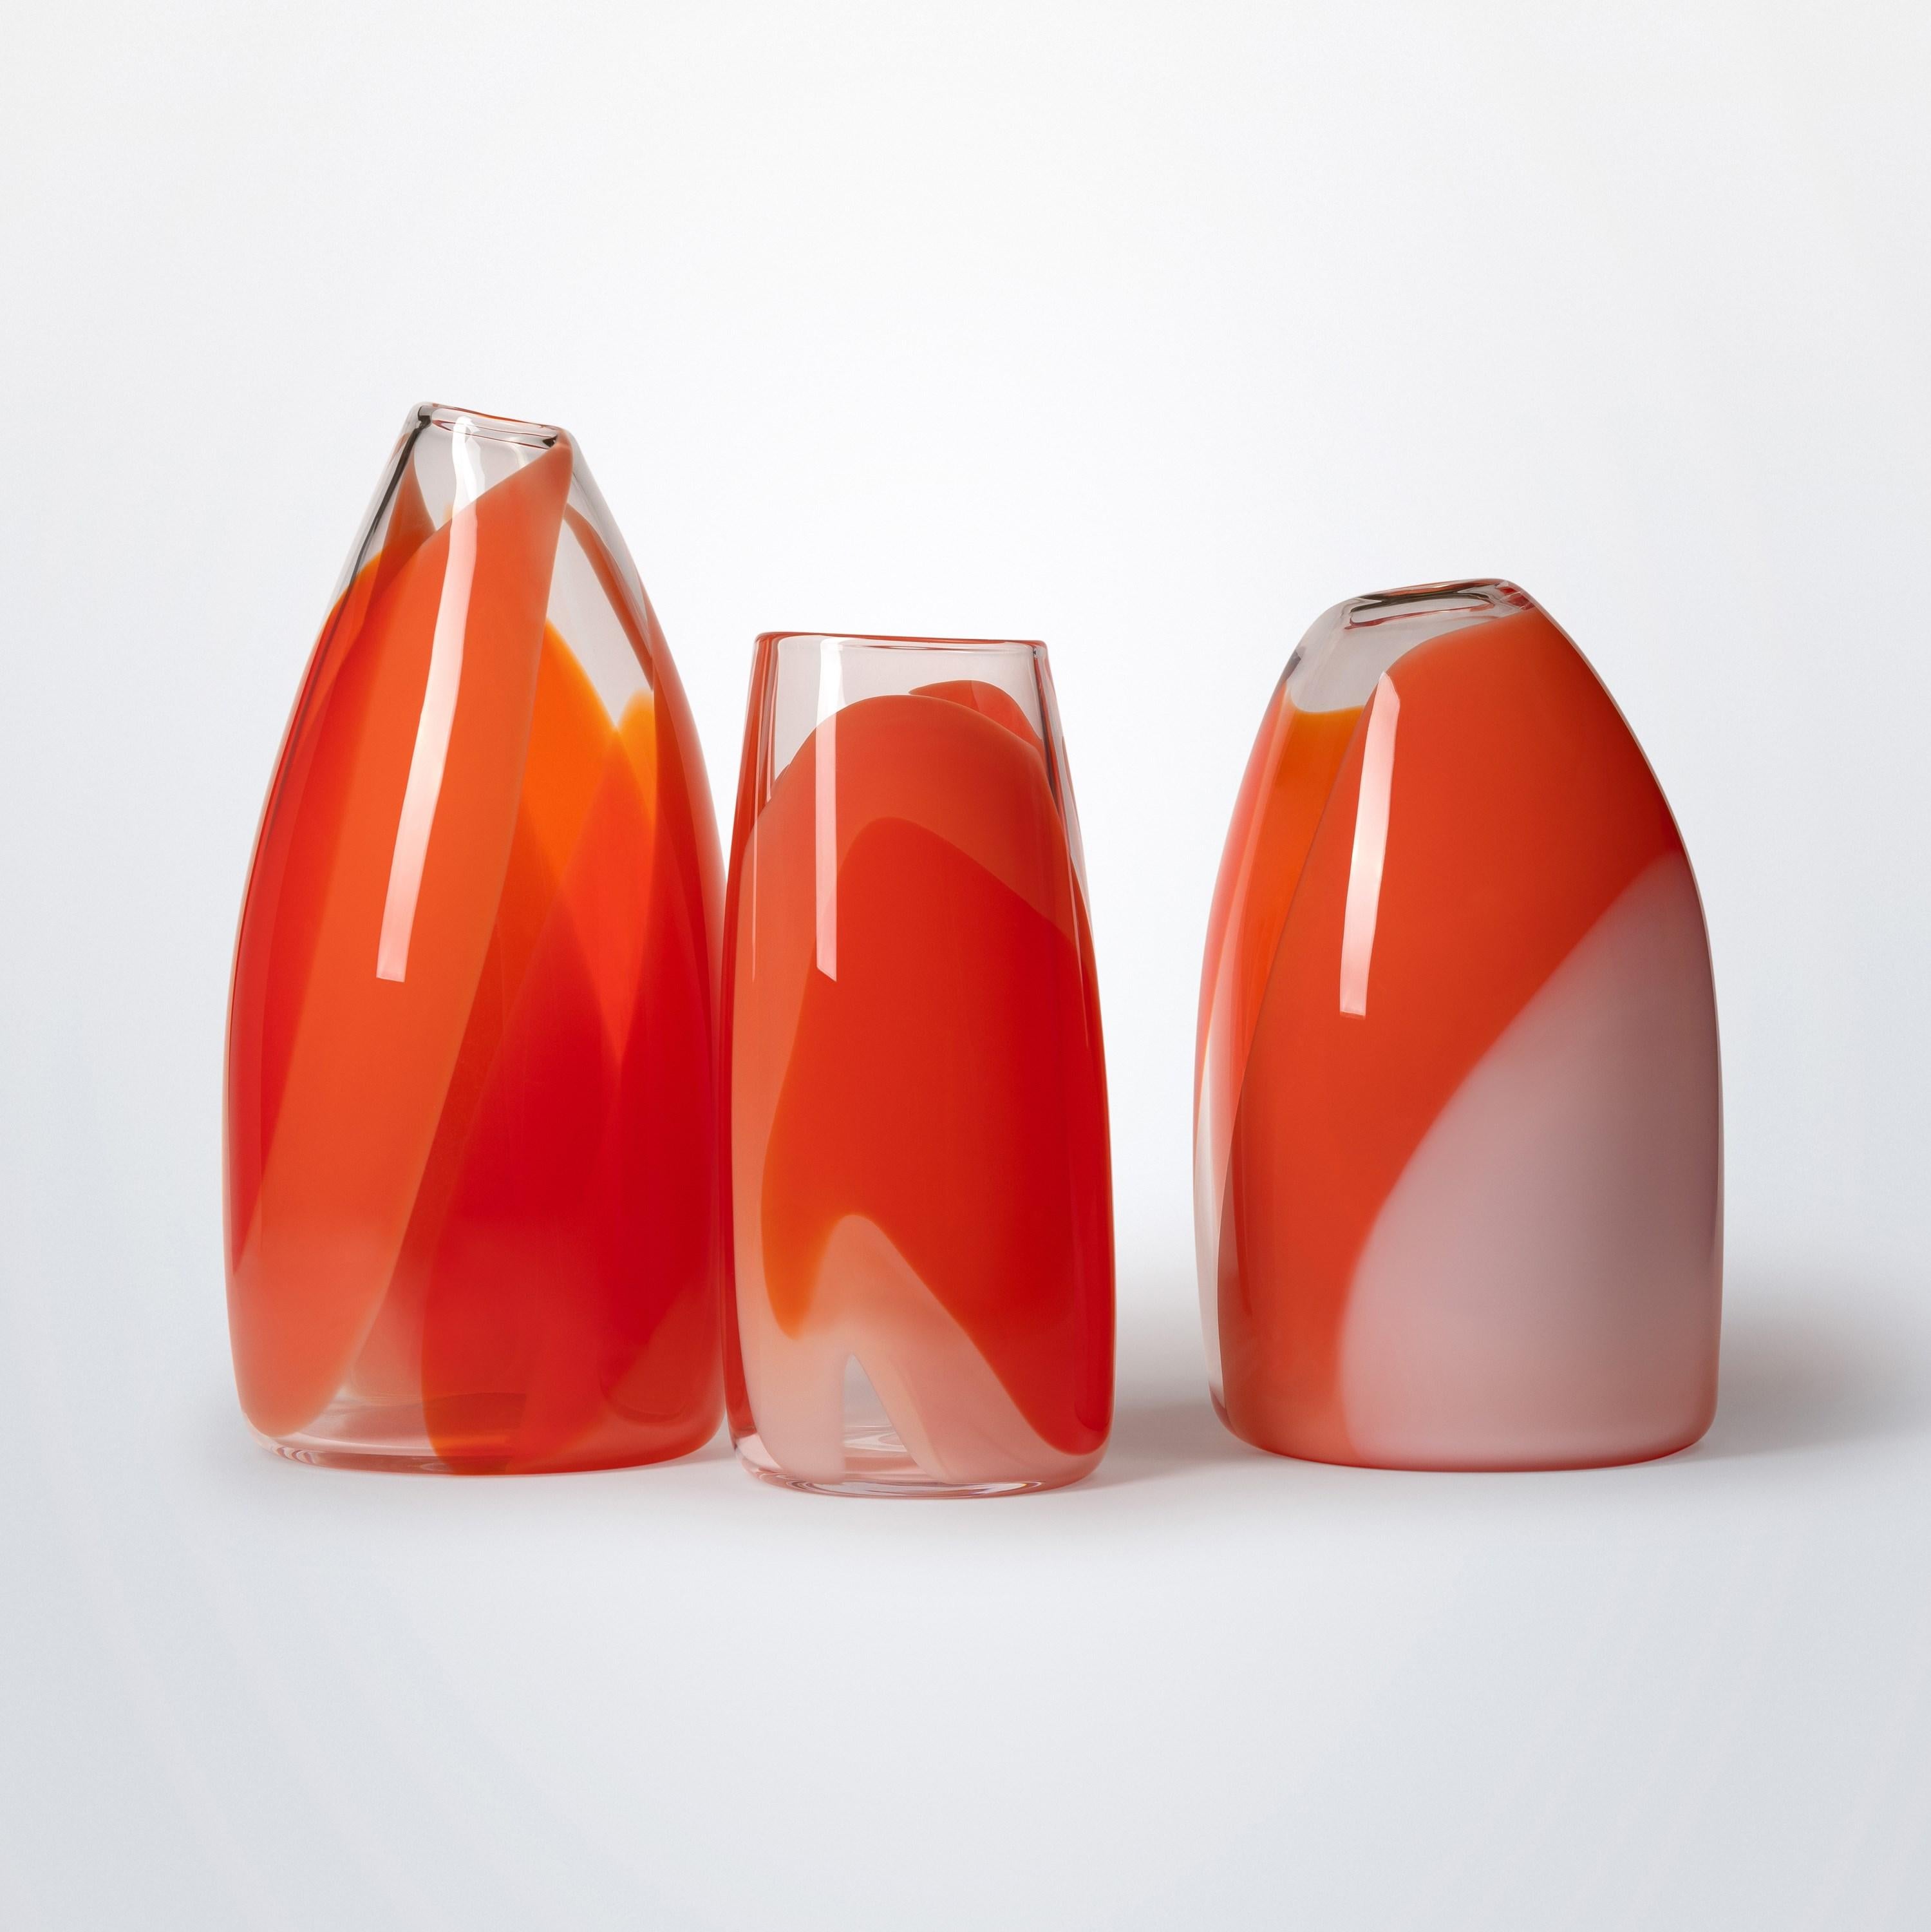 Hand-Crafted Waves No 487, clear, red, orange & peach hand blown glass vase by Neil Wilkin